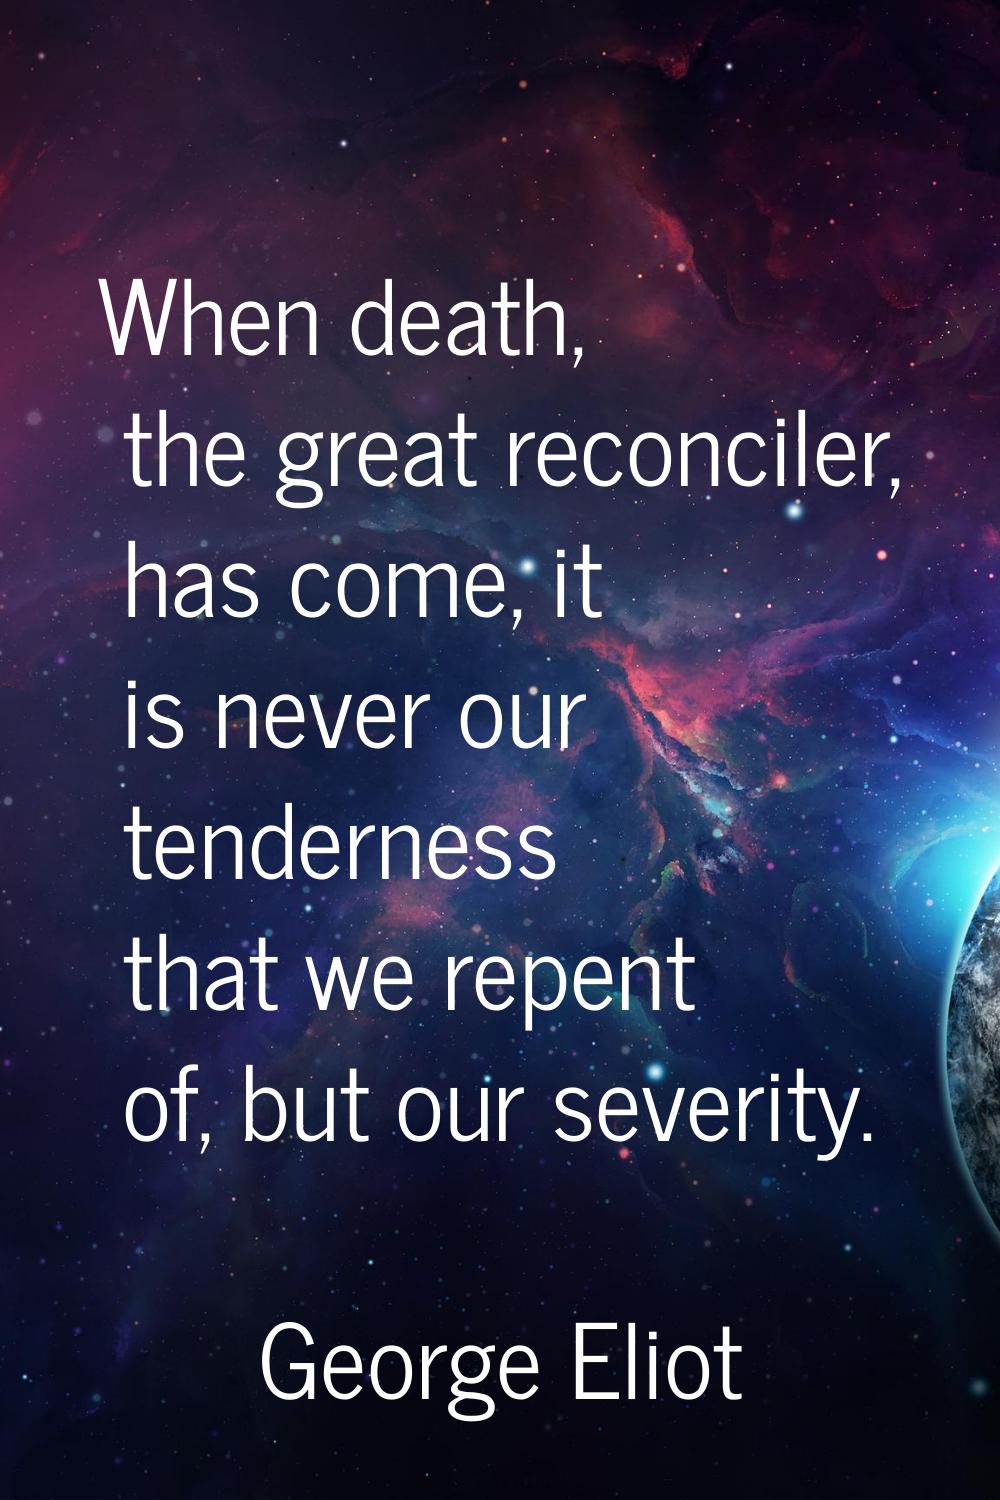 When death, the great reconciler, has come, it is never our tenderness that we repent of, but our s